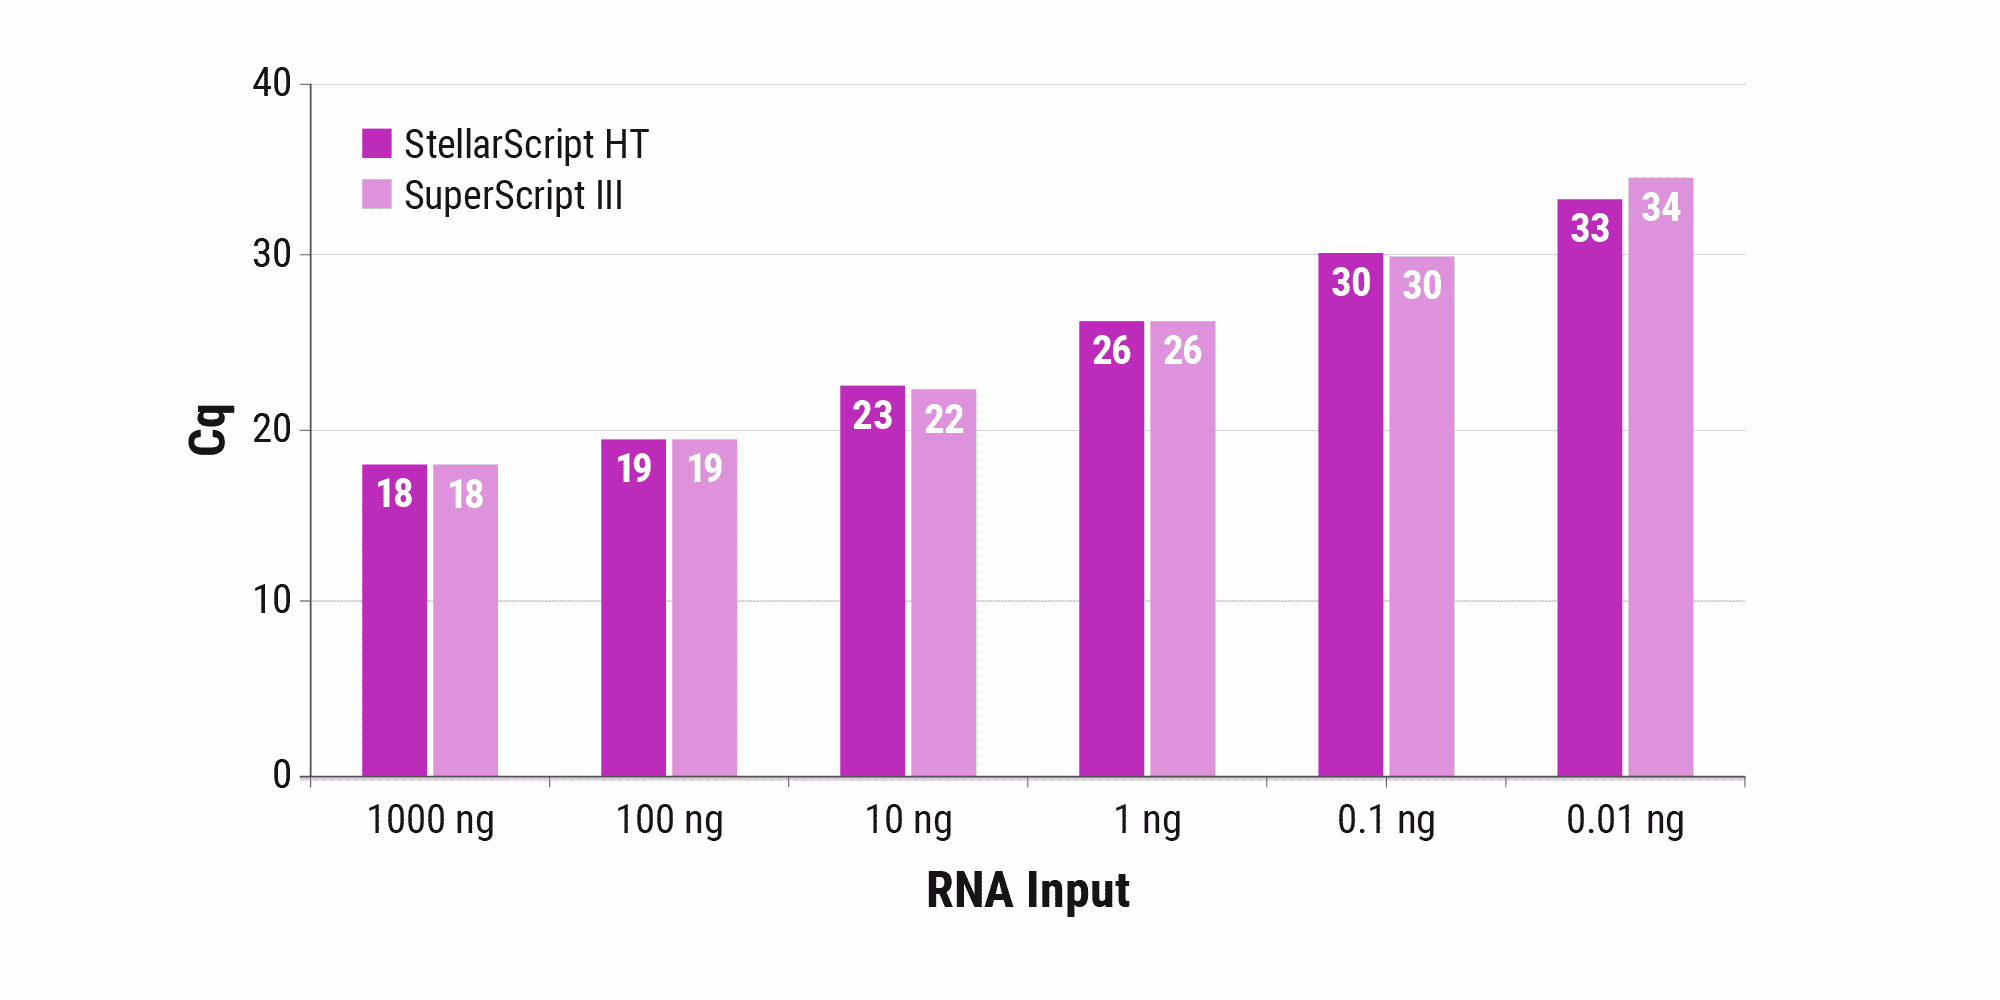 Figure 3. StellarScript HT provides equivalent performance to SuperScript III. Watchmaker’s StellarScript HT and ThermoFisher Scientific’s SuperScript III were run in oligo-dT and randomly primed first strand synthesis at 50°C for 40 minutes using 1000 ng to 0.01 ng total liver RNA as template. Resulting cDNA yields were assessed via qPCR. StellarScript HT showed overall equivalency to SuperScript III.